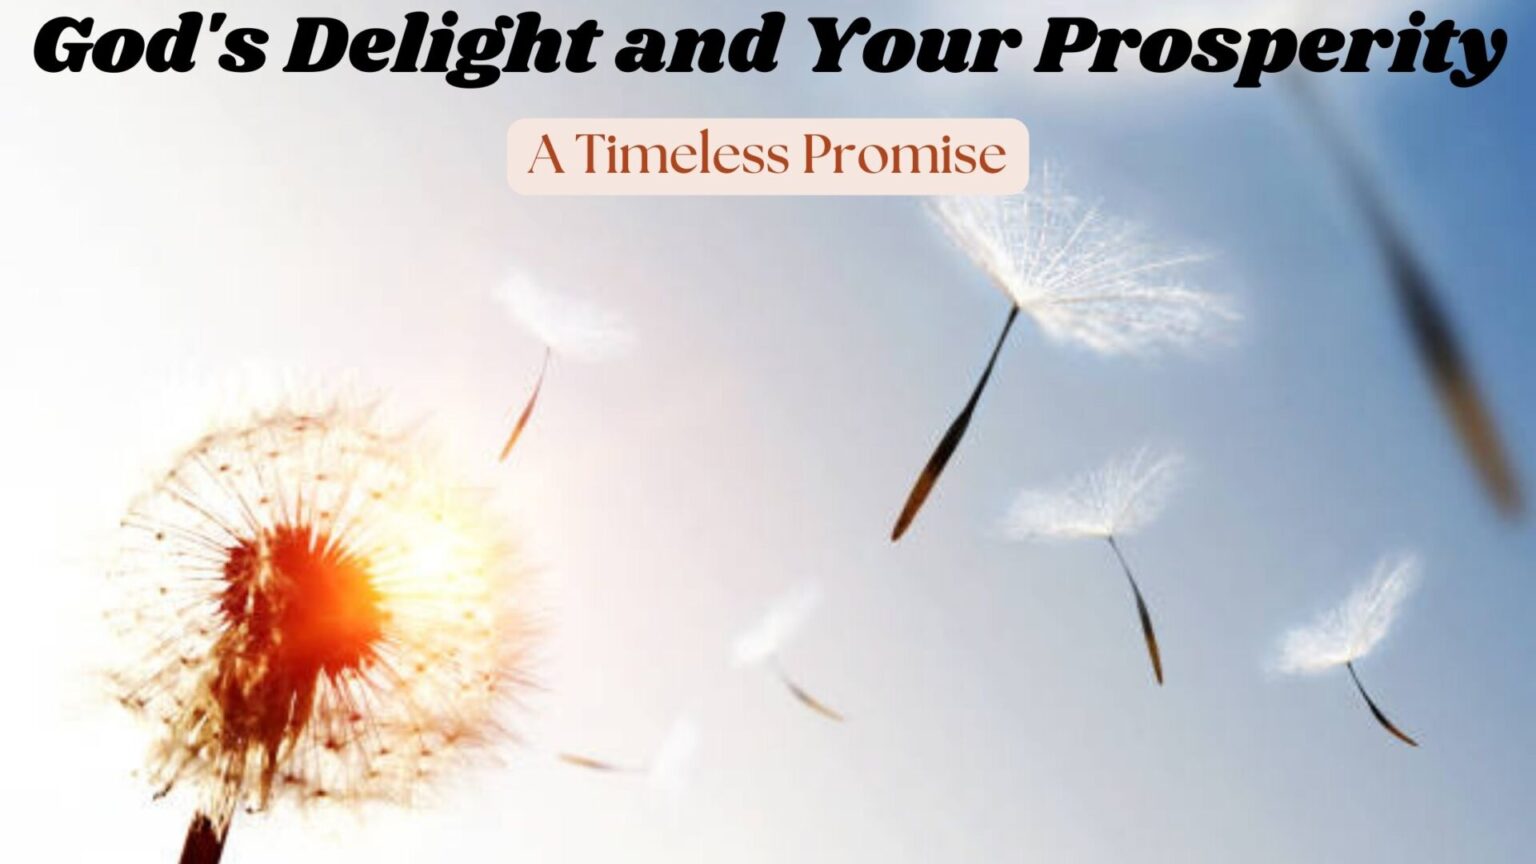 God's Delight and Your Prosperity: A Timeless Promise